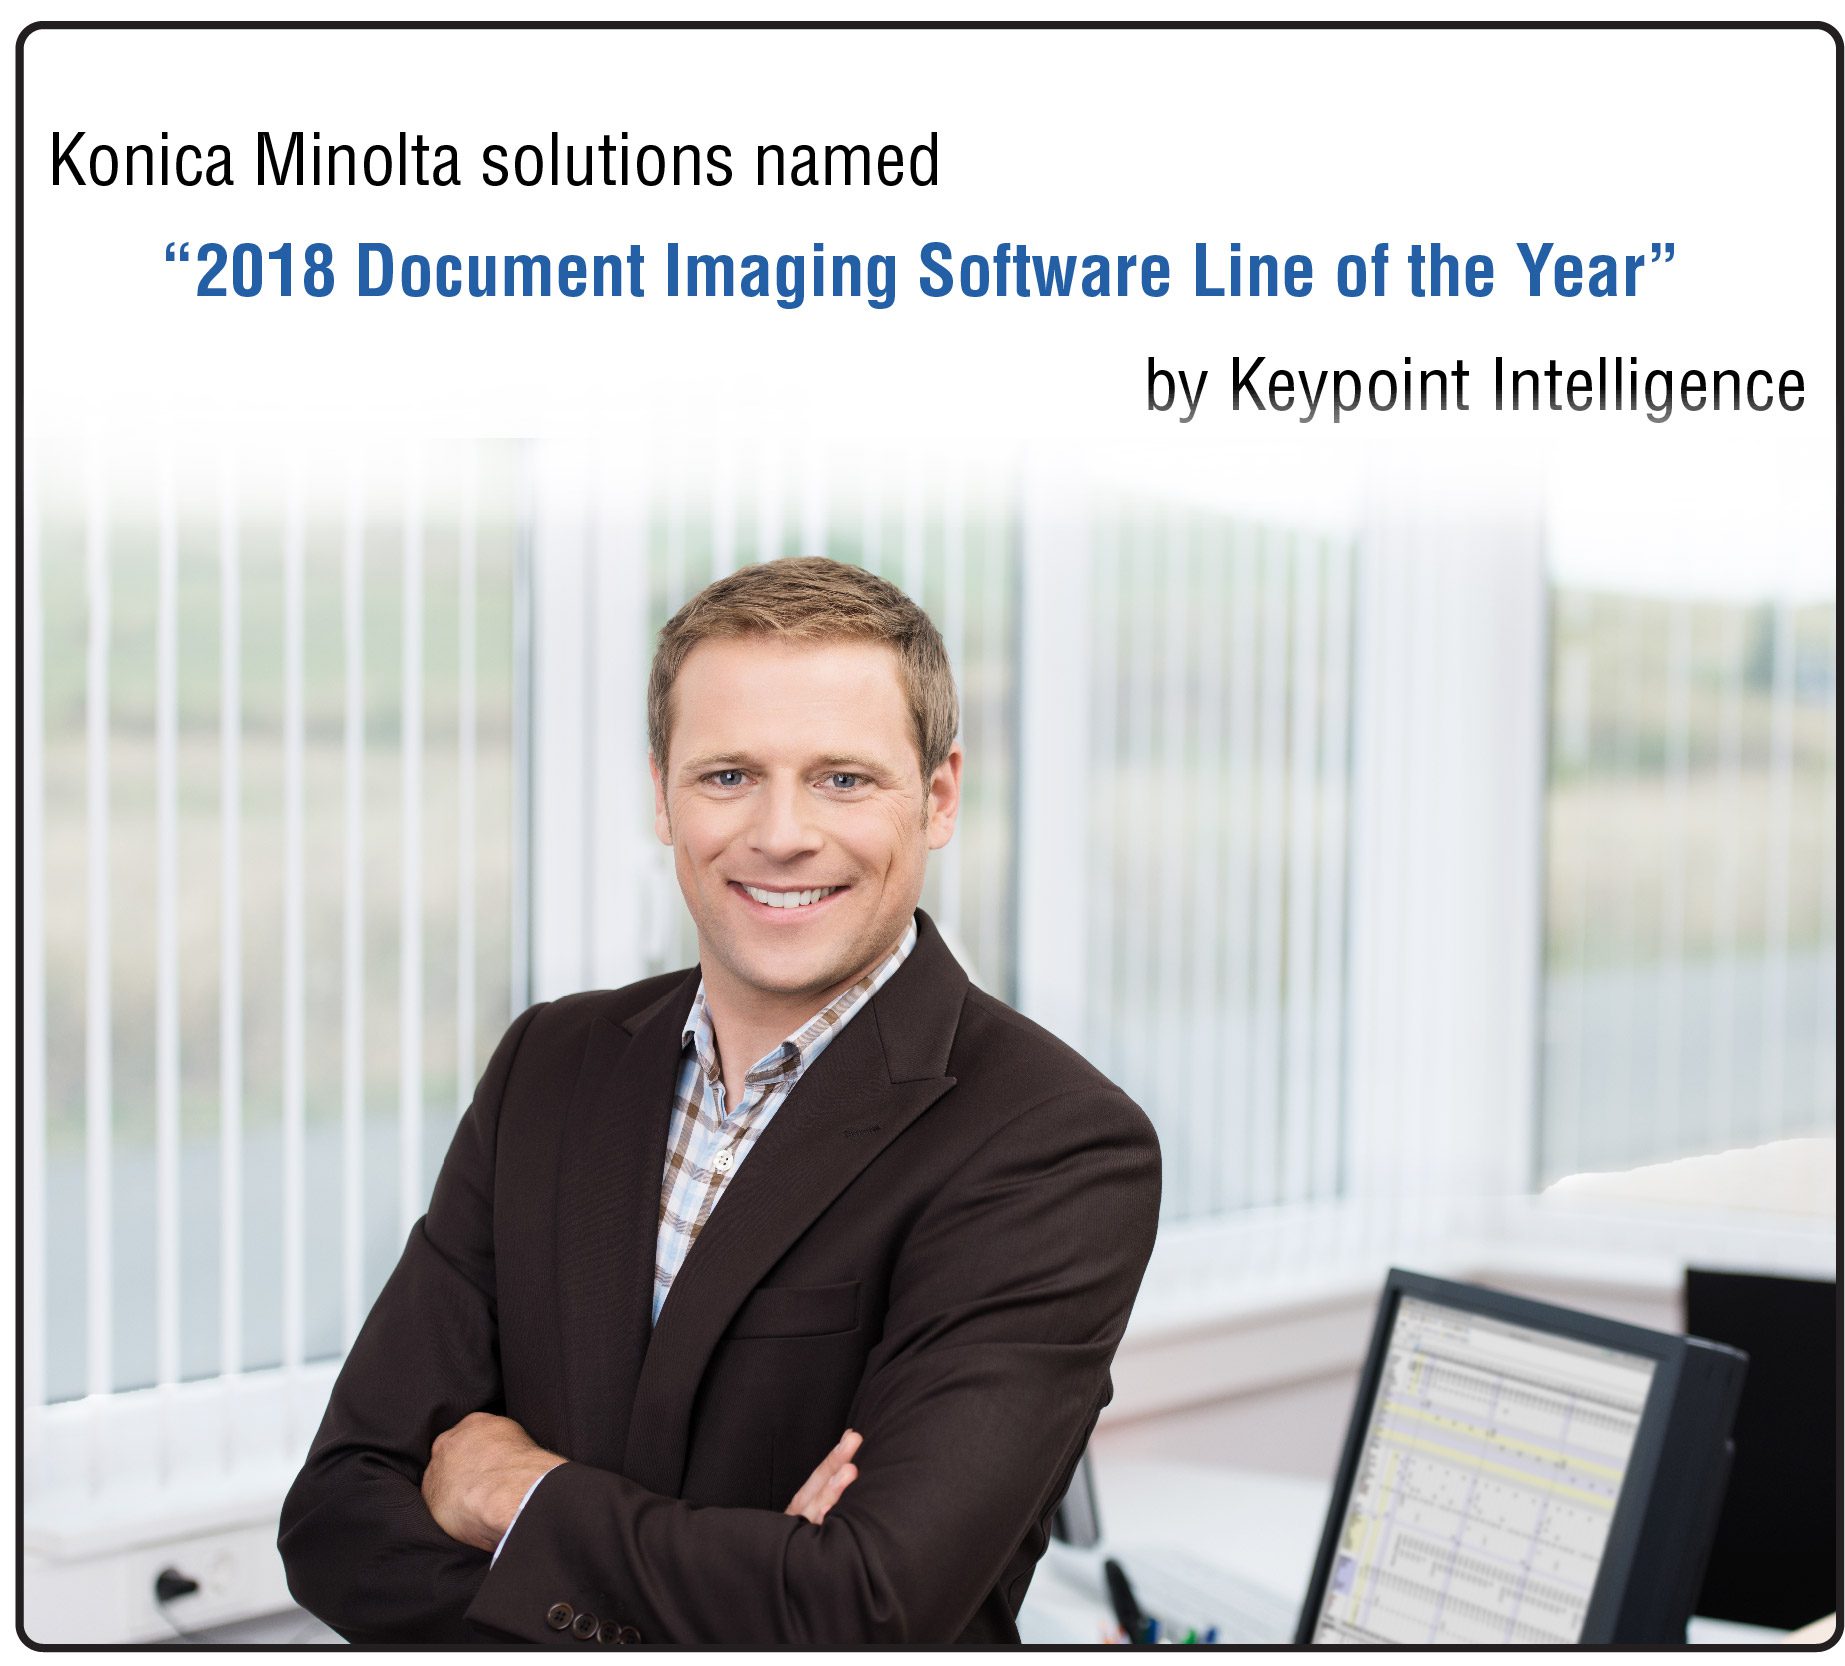 Konica Minolta solutions: “2018 Document Imaging Software Line of the Year”